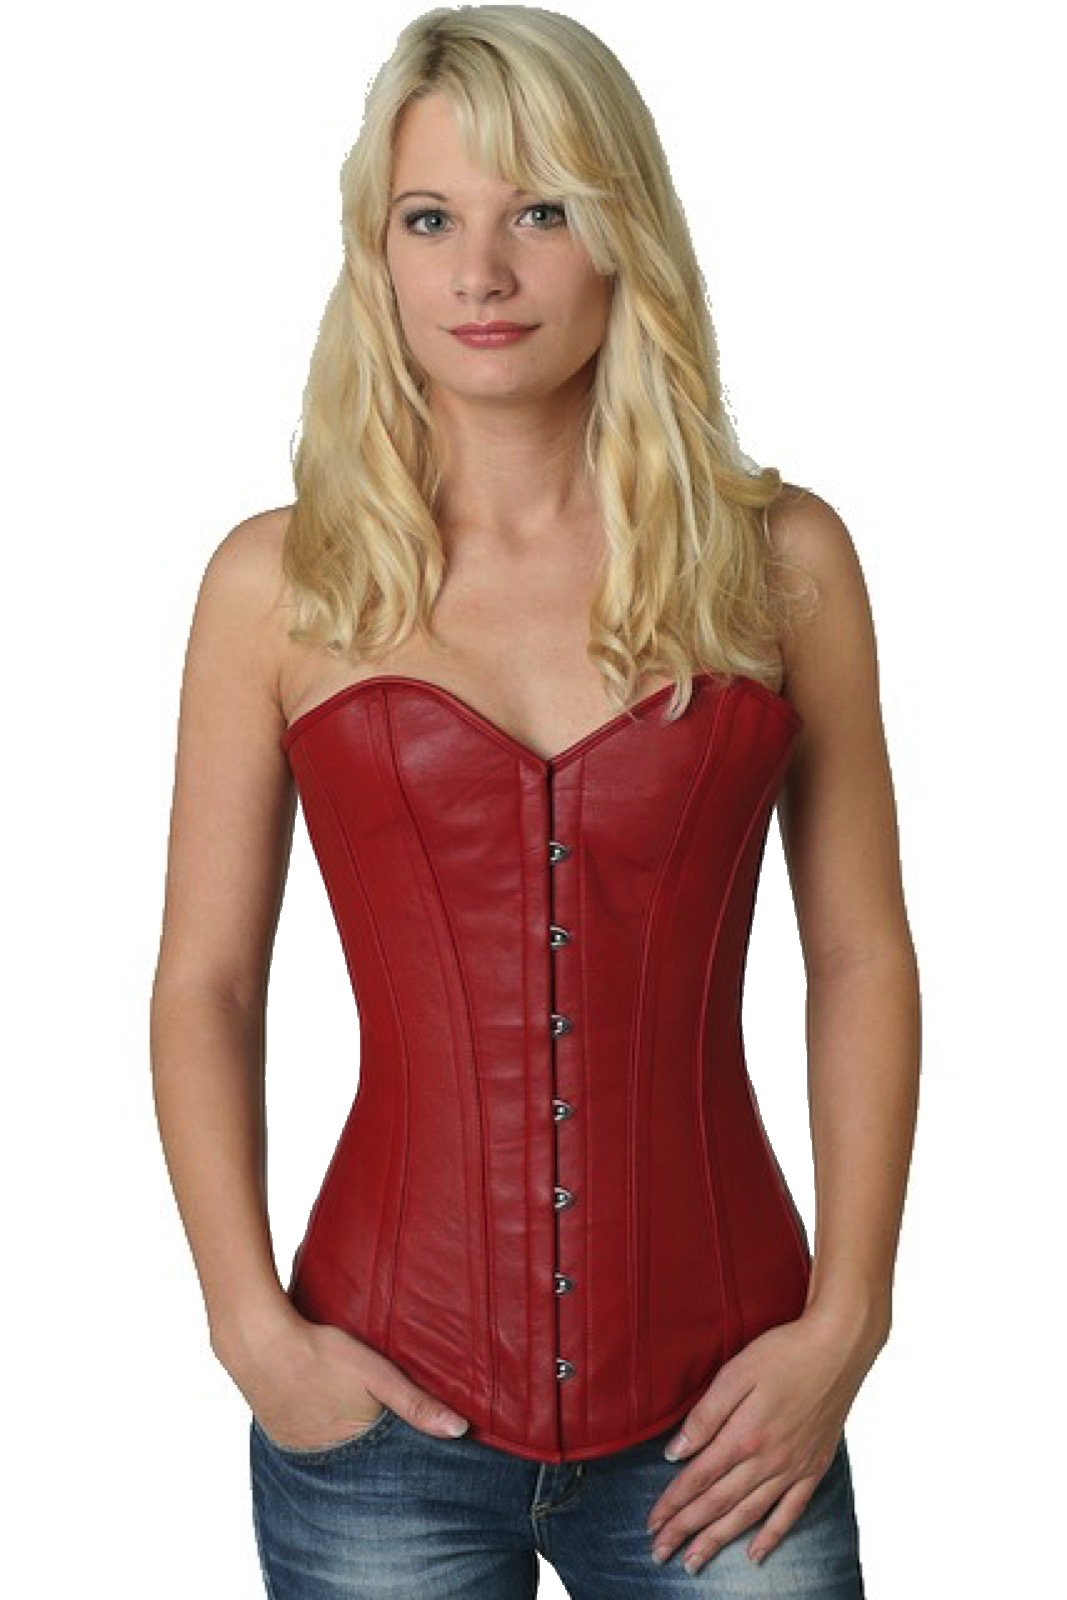 Corset red leather overbust ly23